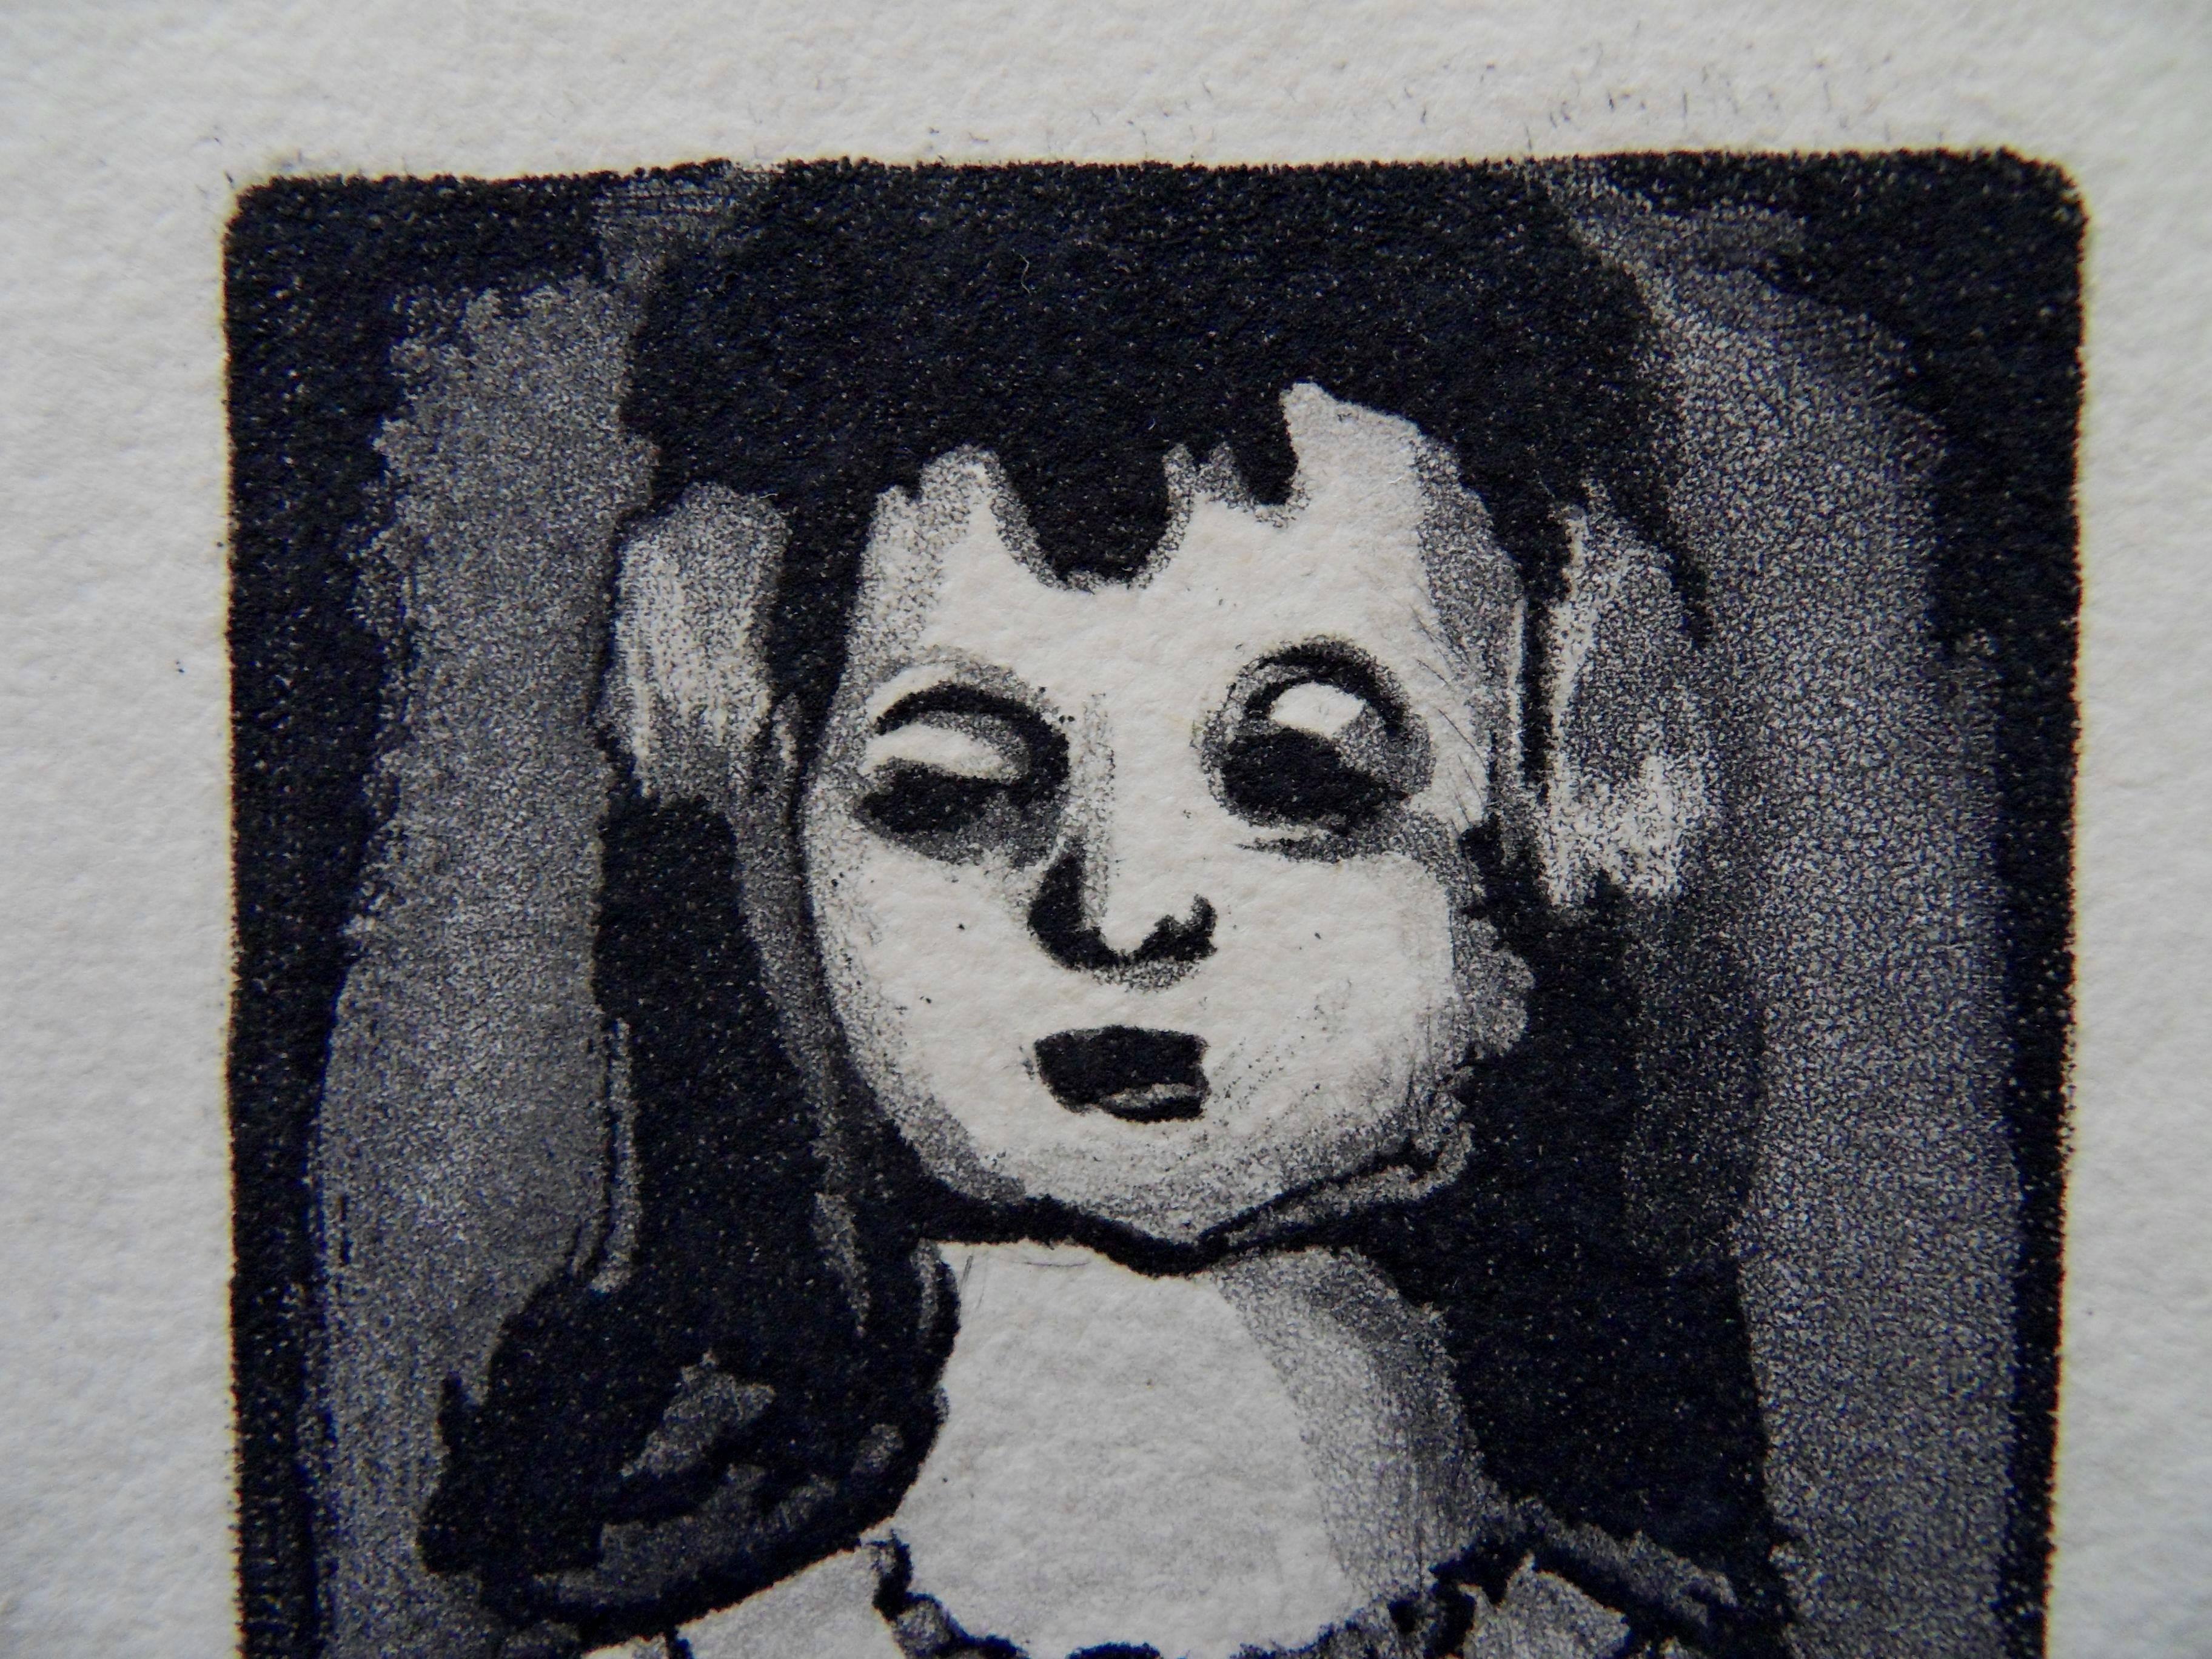 Woman with Flowers in the Hair - Original etching - 1929 - Gray Figurative Print by Georges Rouault